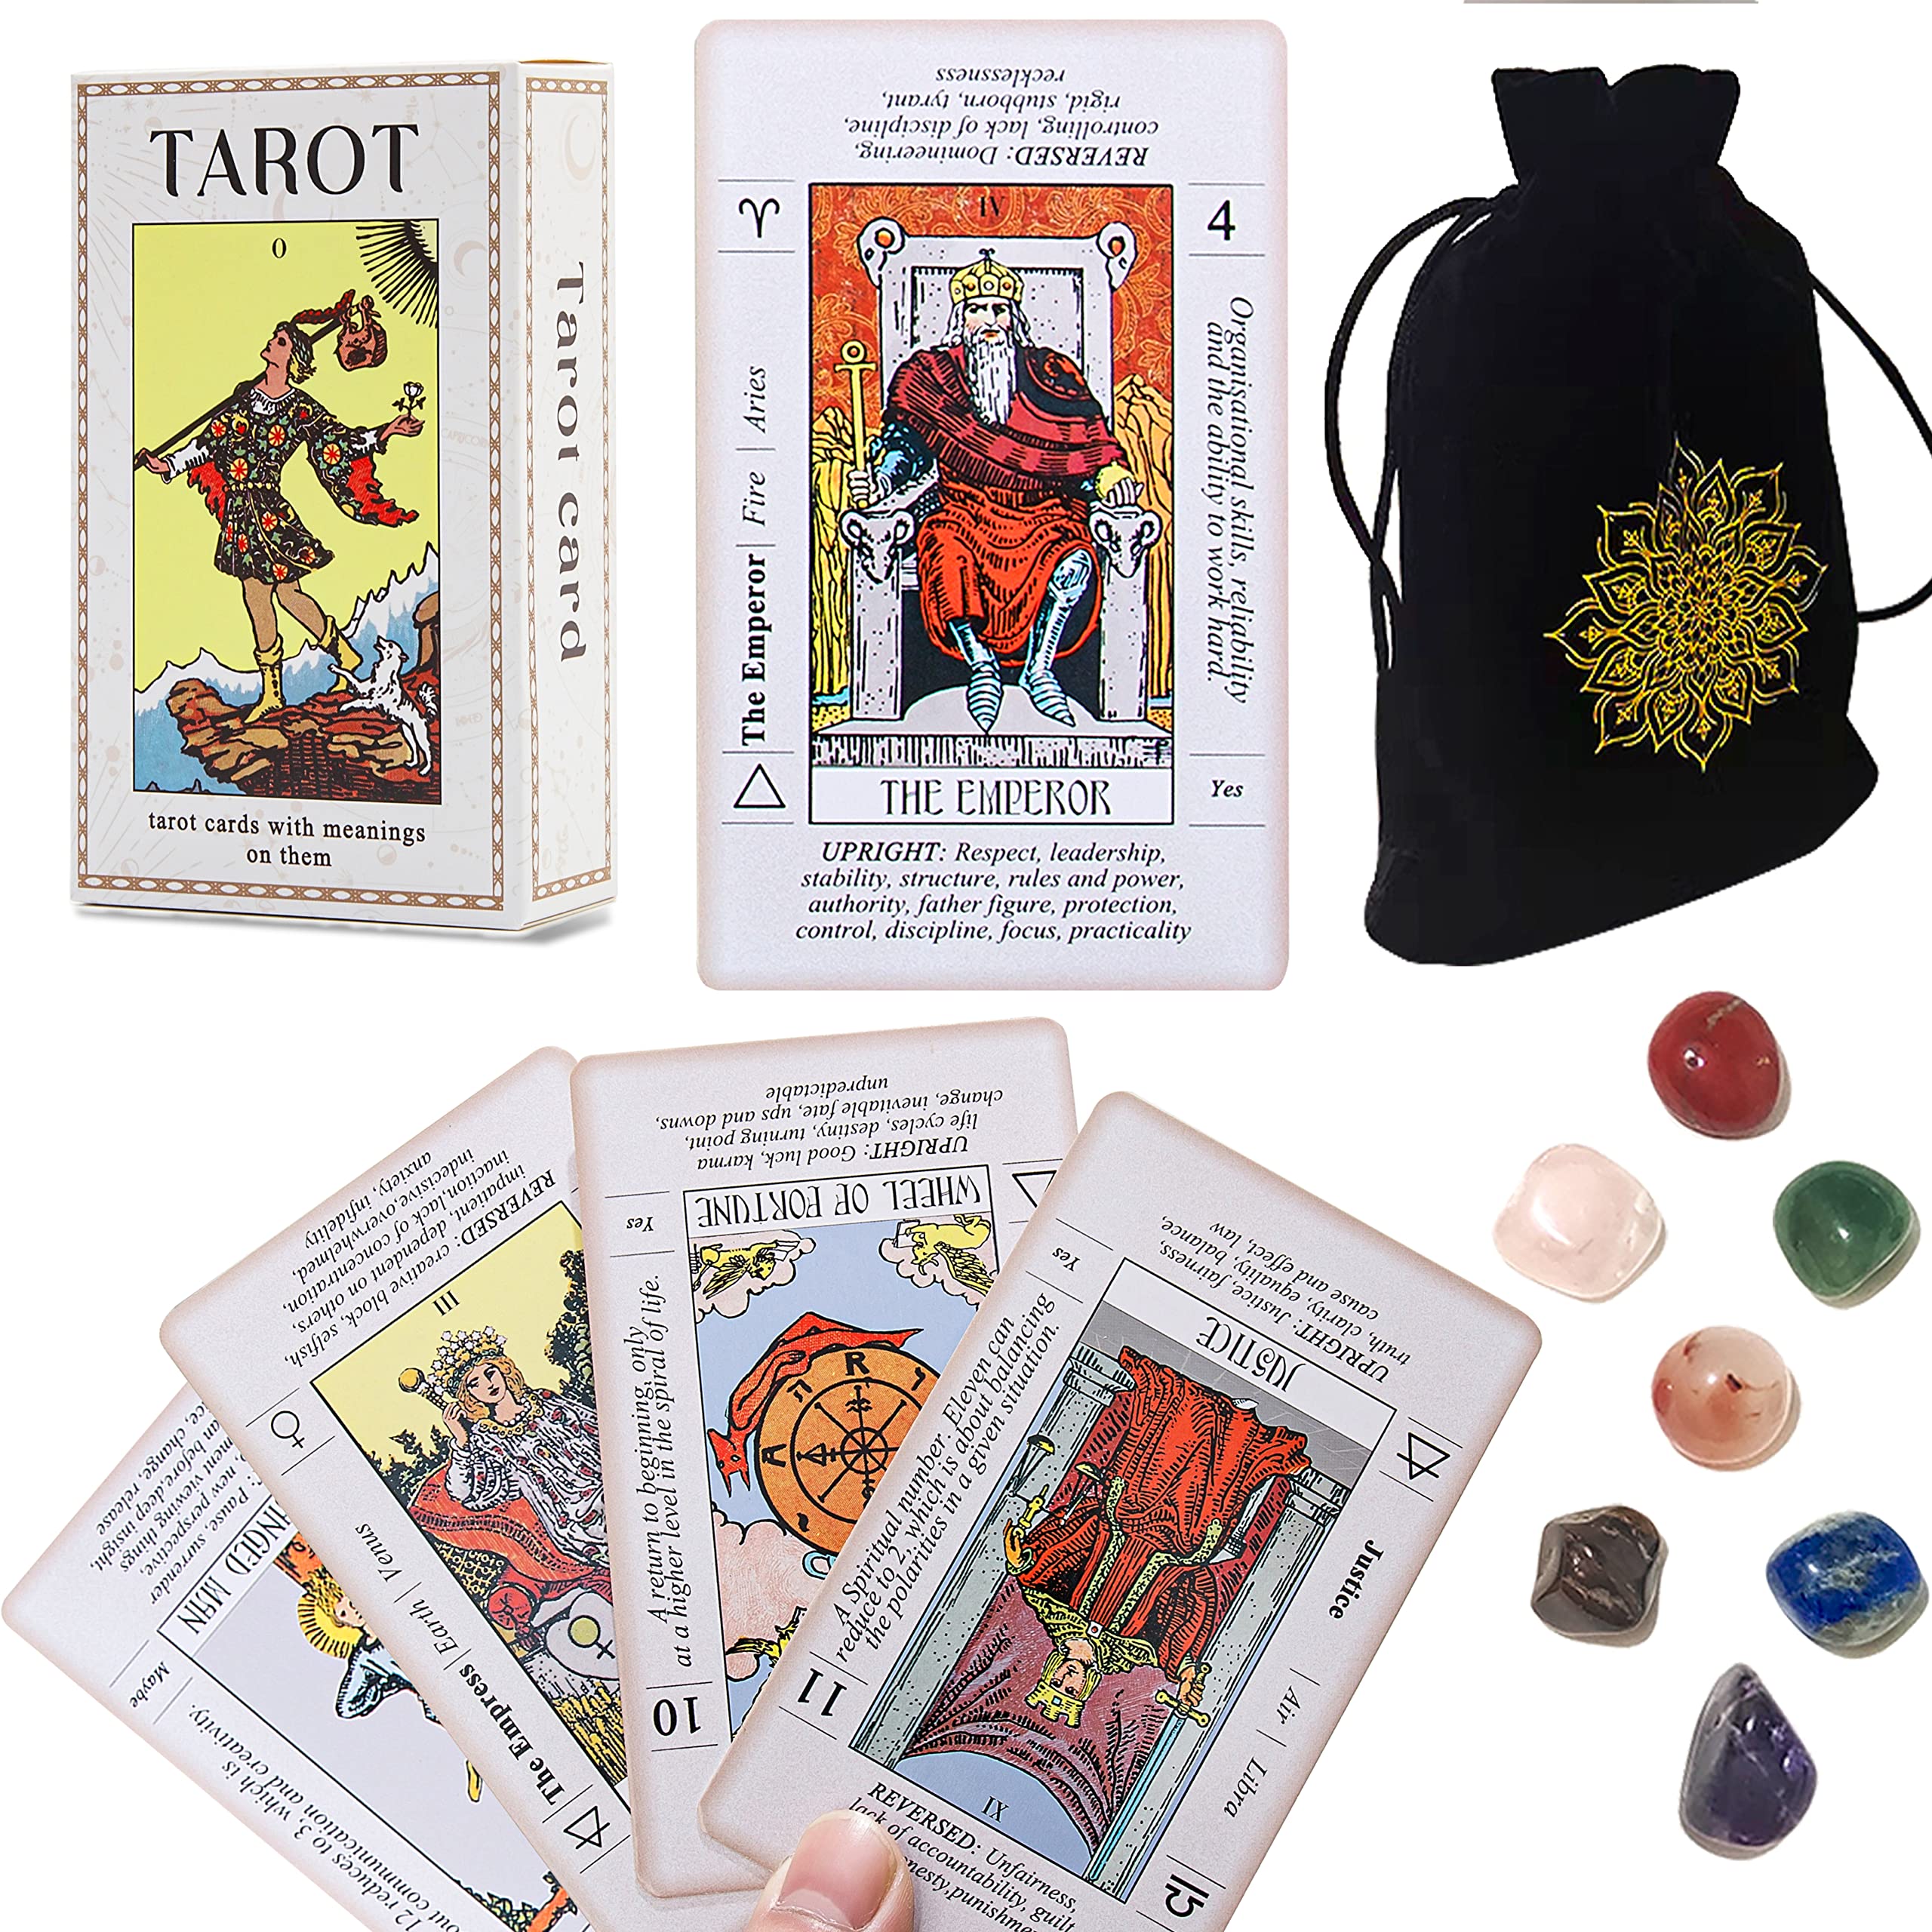 Sincerez Tarot Cards Deck for Beginners with Meanings On Them,Tarot Card with Guidebook (White Set with Crystals)